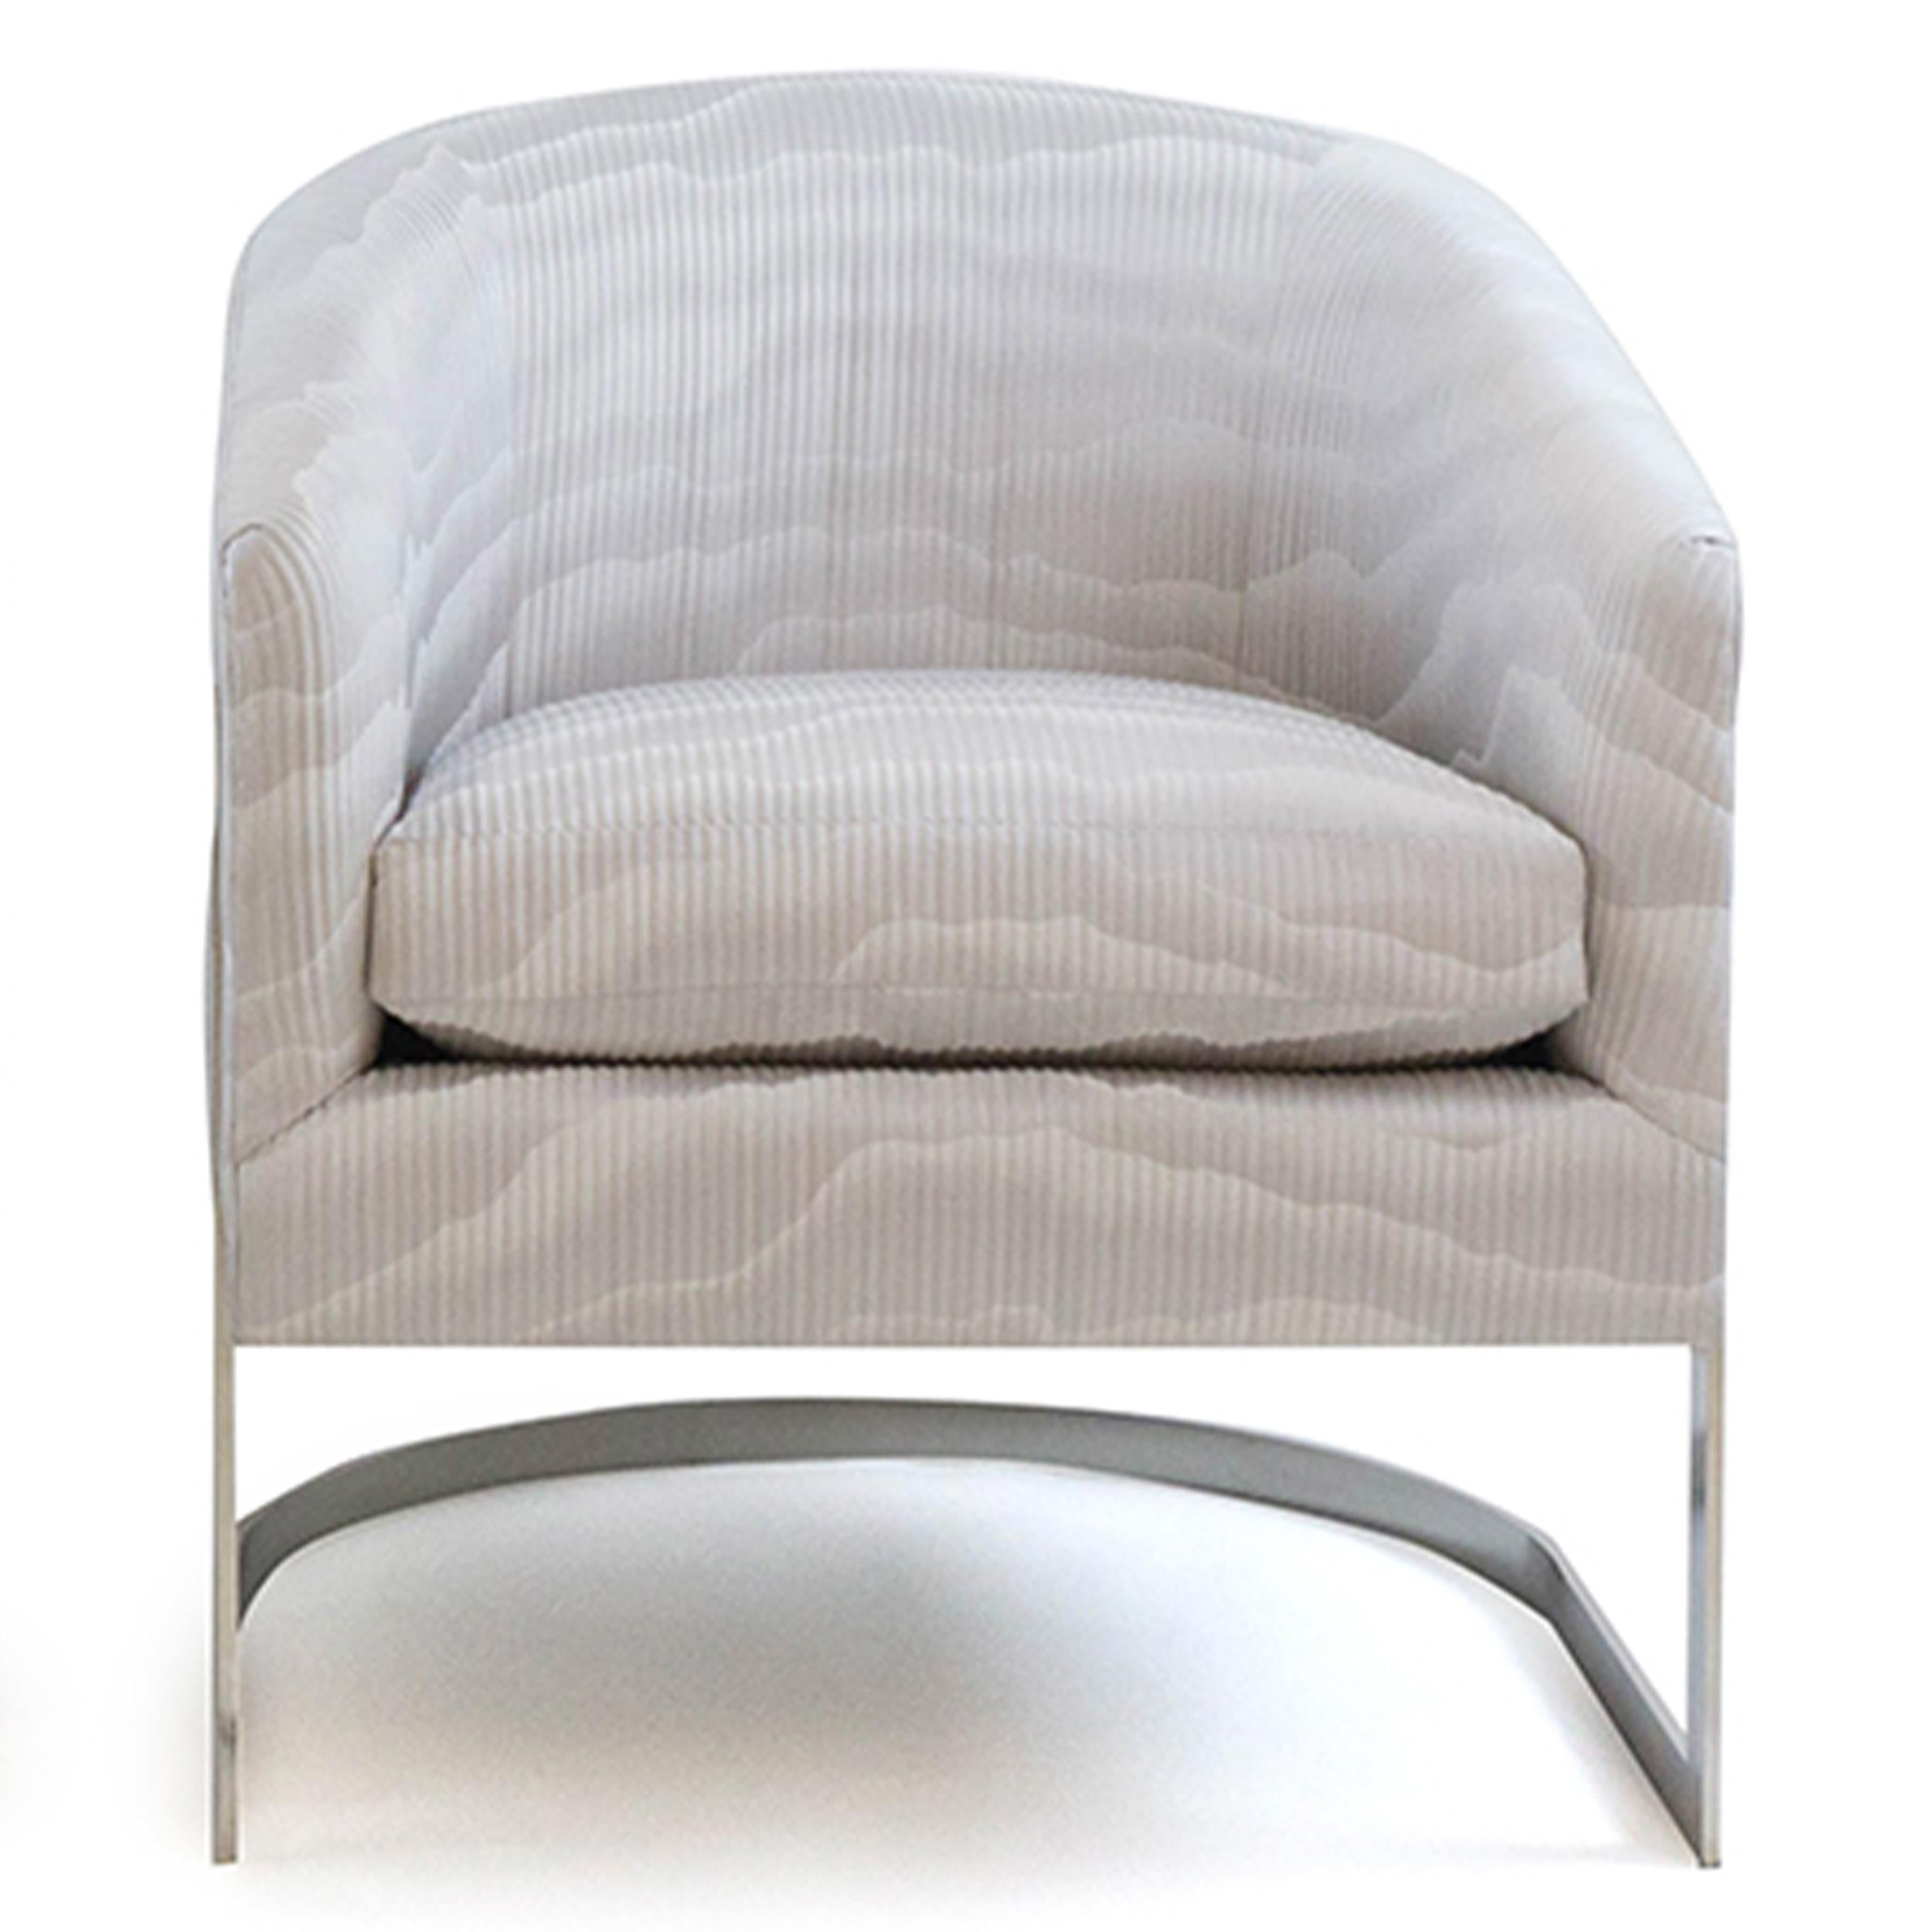 Modern curved back steel framed chair is upholstered in a multi-tonal wavy pattern gray fabric by Zinc textiles that was inspired by a stylized Japanese landscape. Thin channels in the weave give it a subtle texture. The feather wrapped foam seat